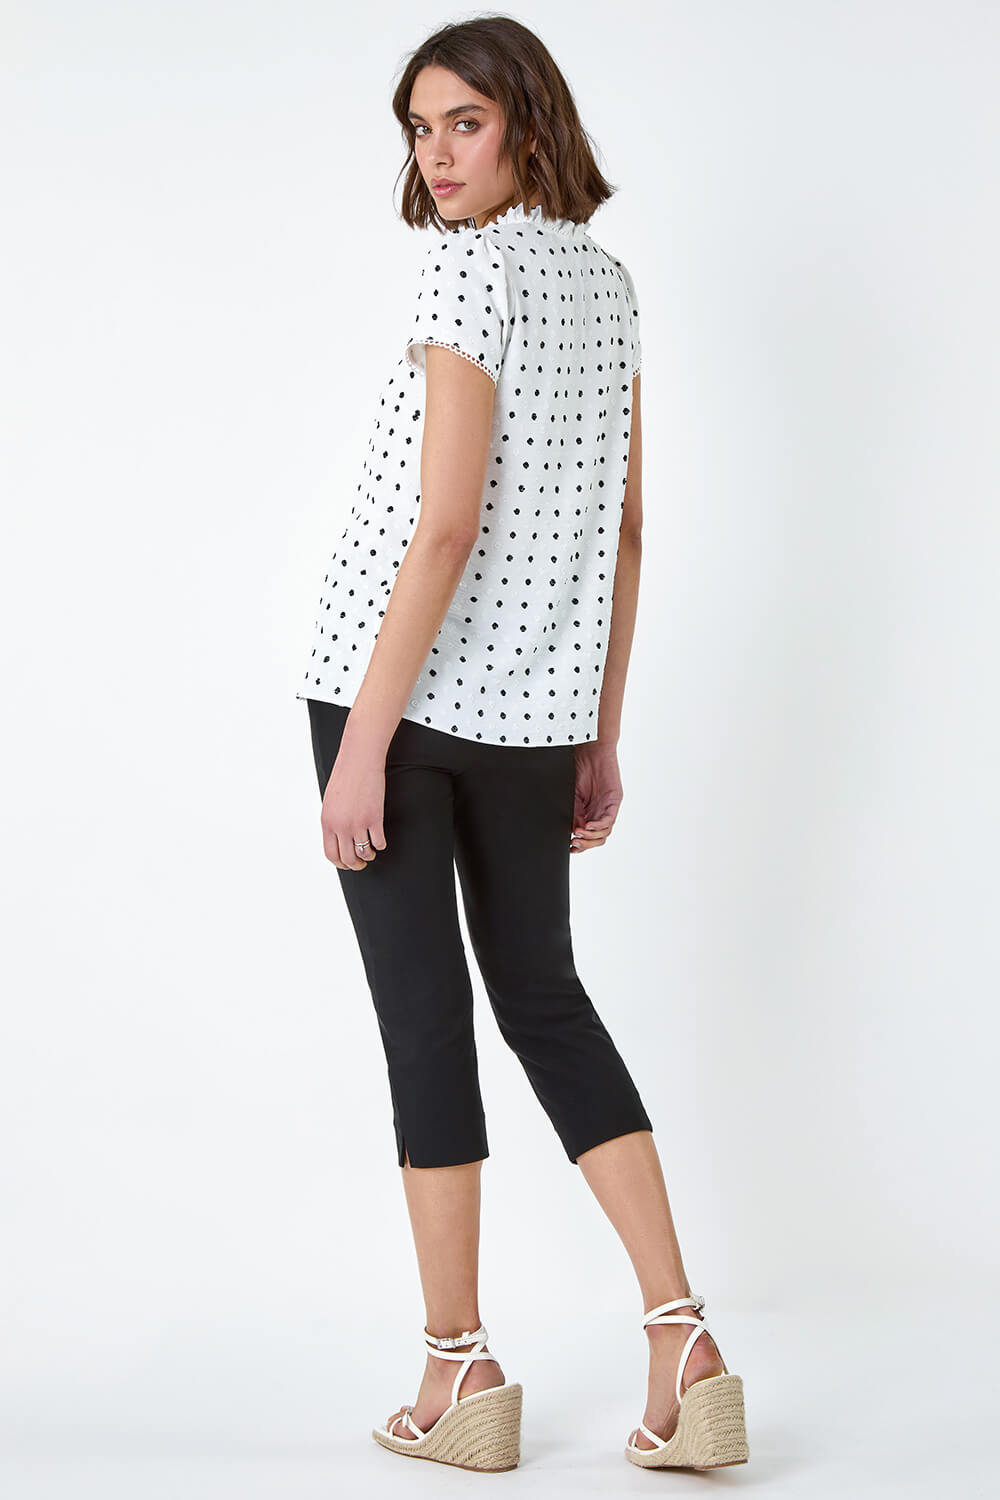 Ivory  Textured Spot Print Ruffle Detail Top, Image 3 of 5